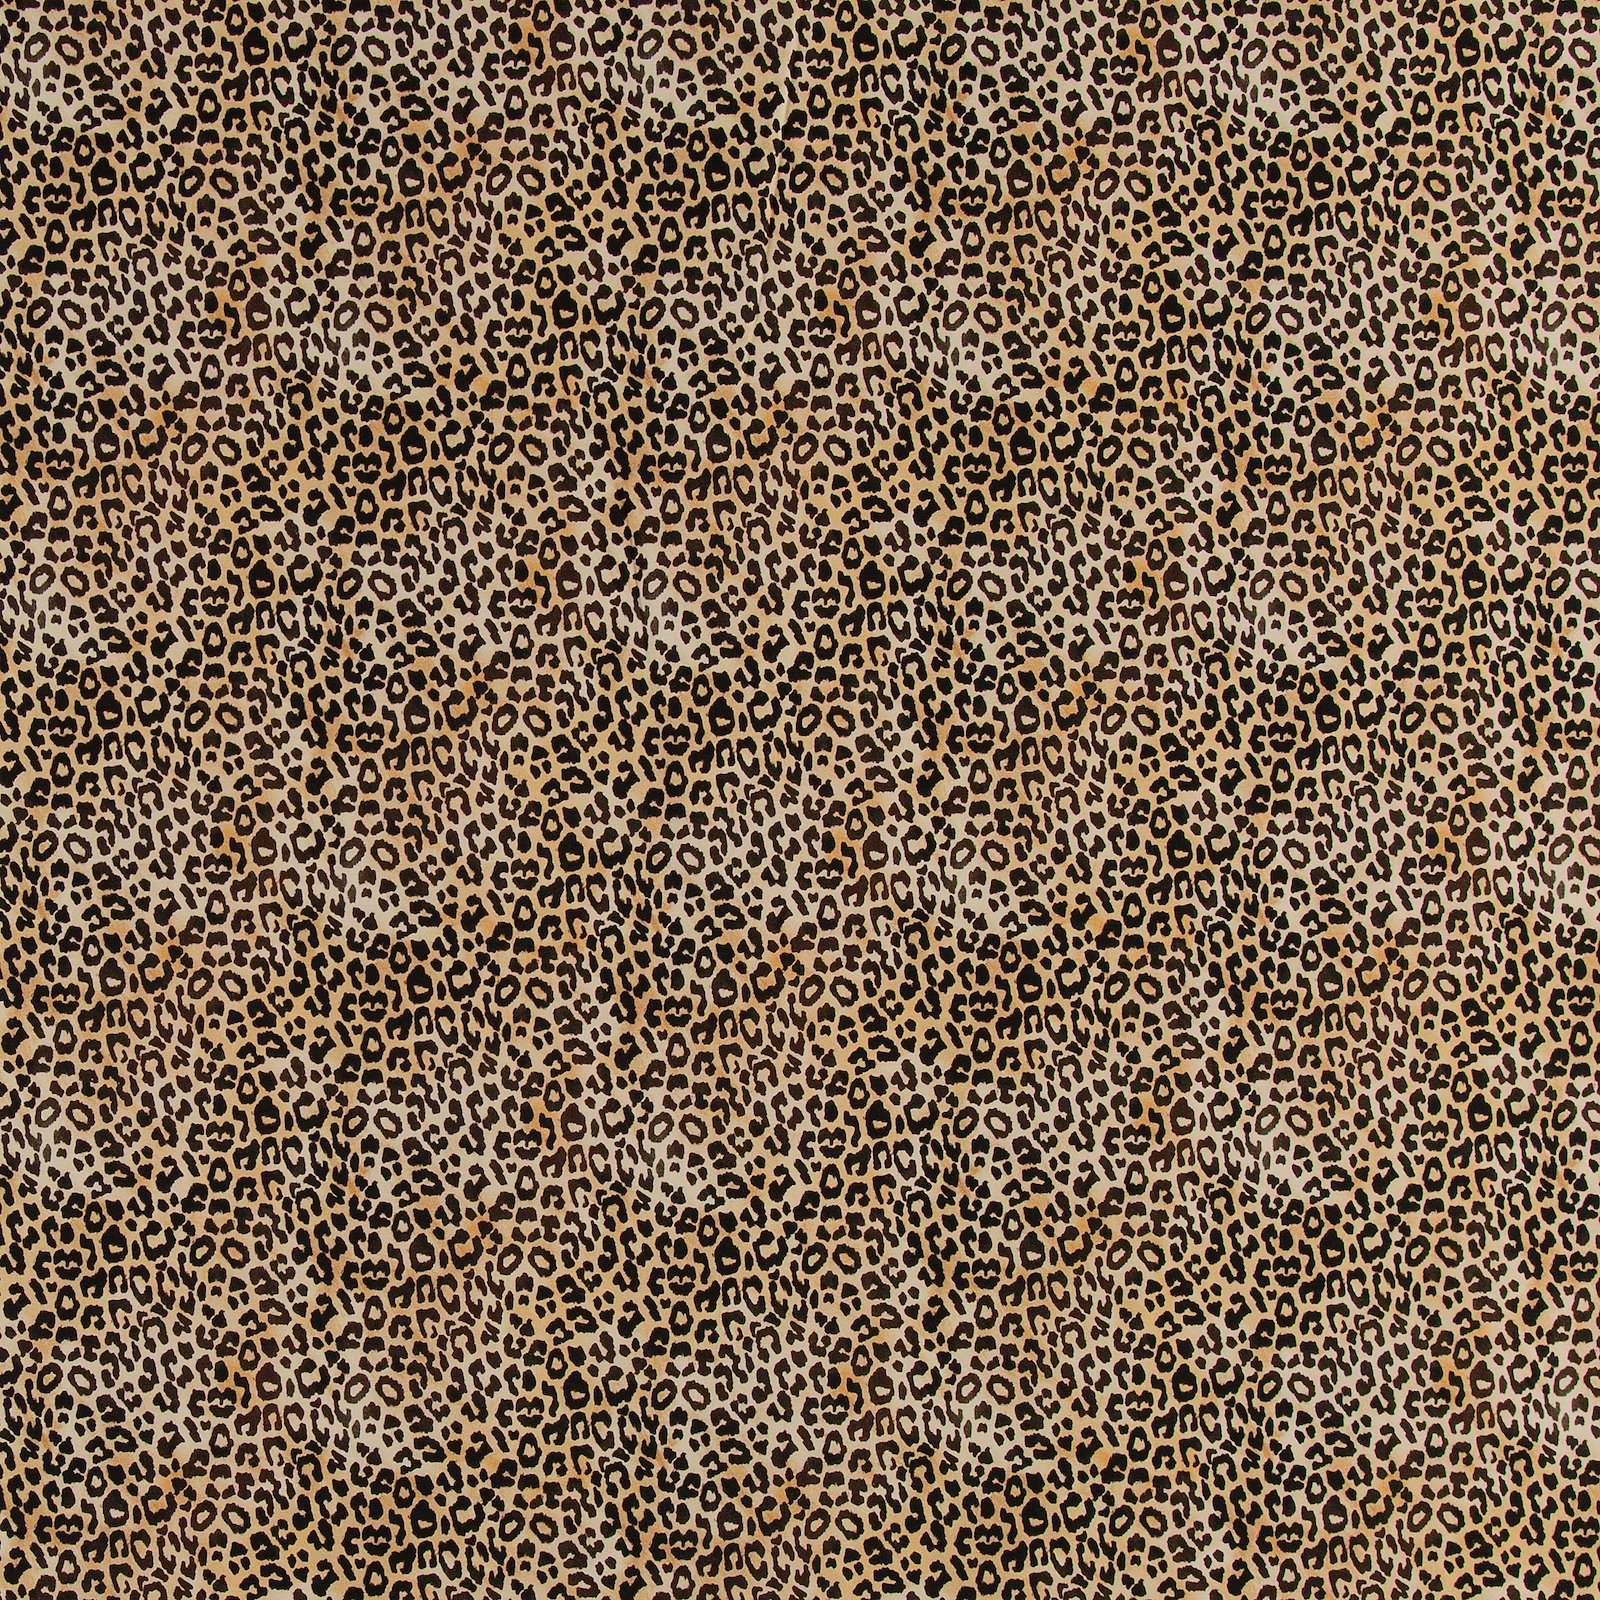 Ecovero woven viscose wtih animal print 710679_pack_sp